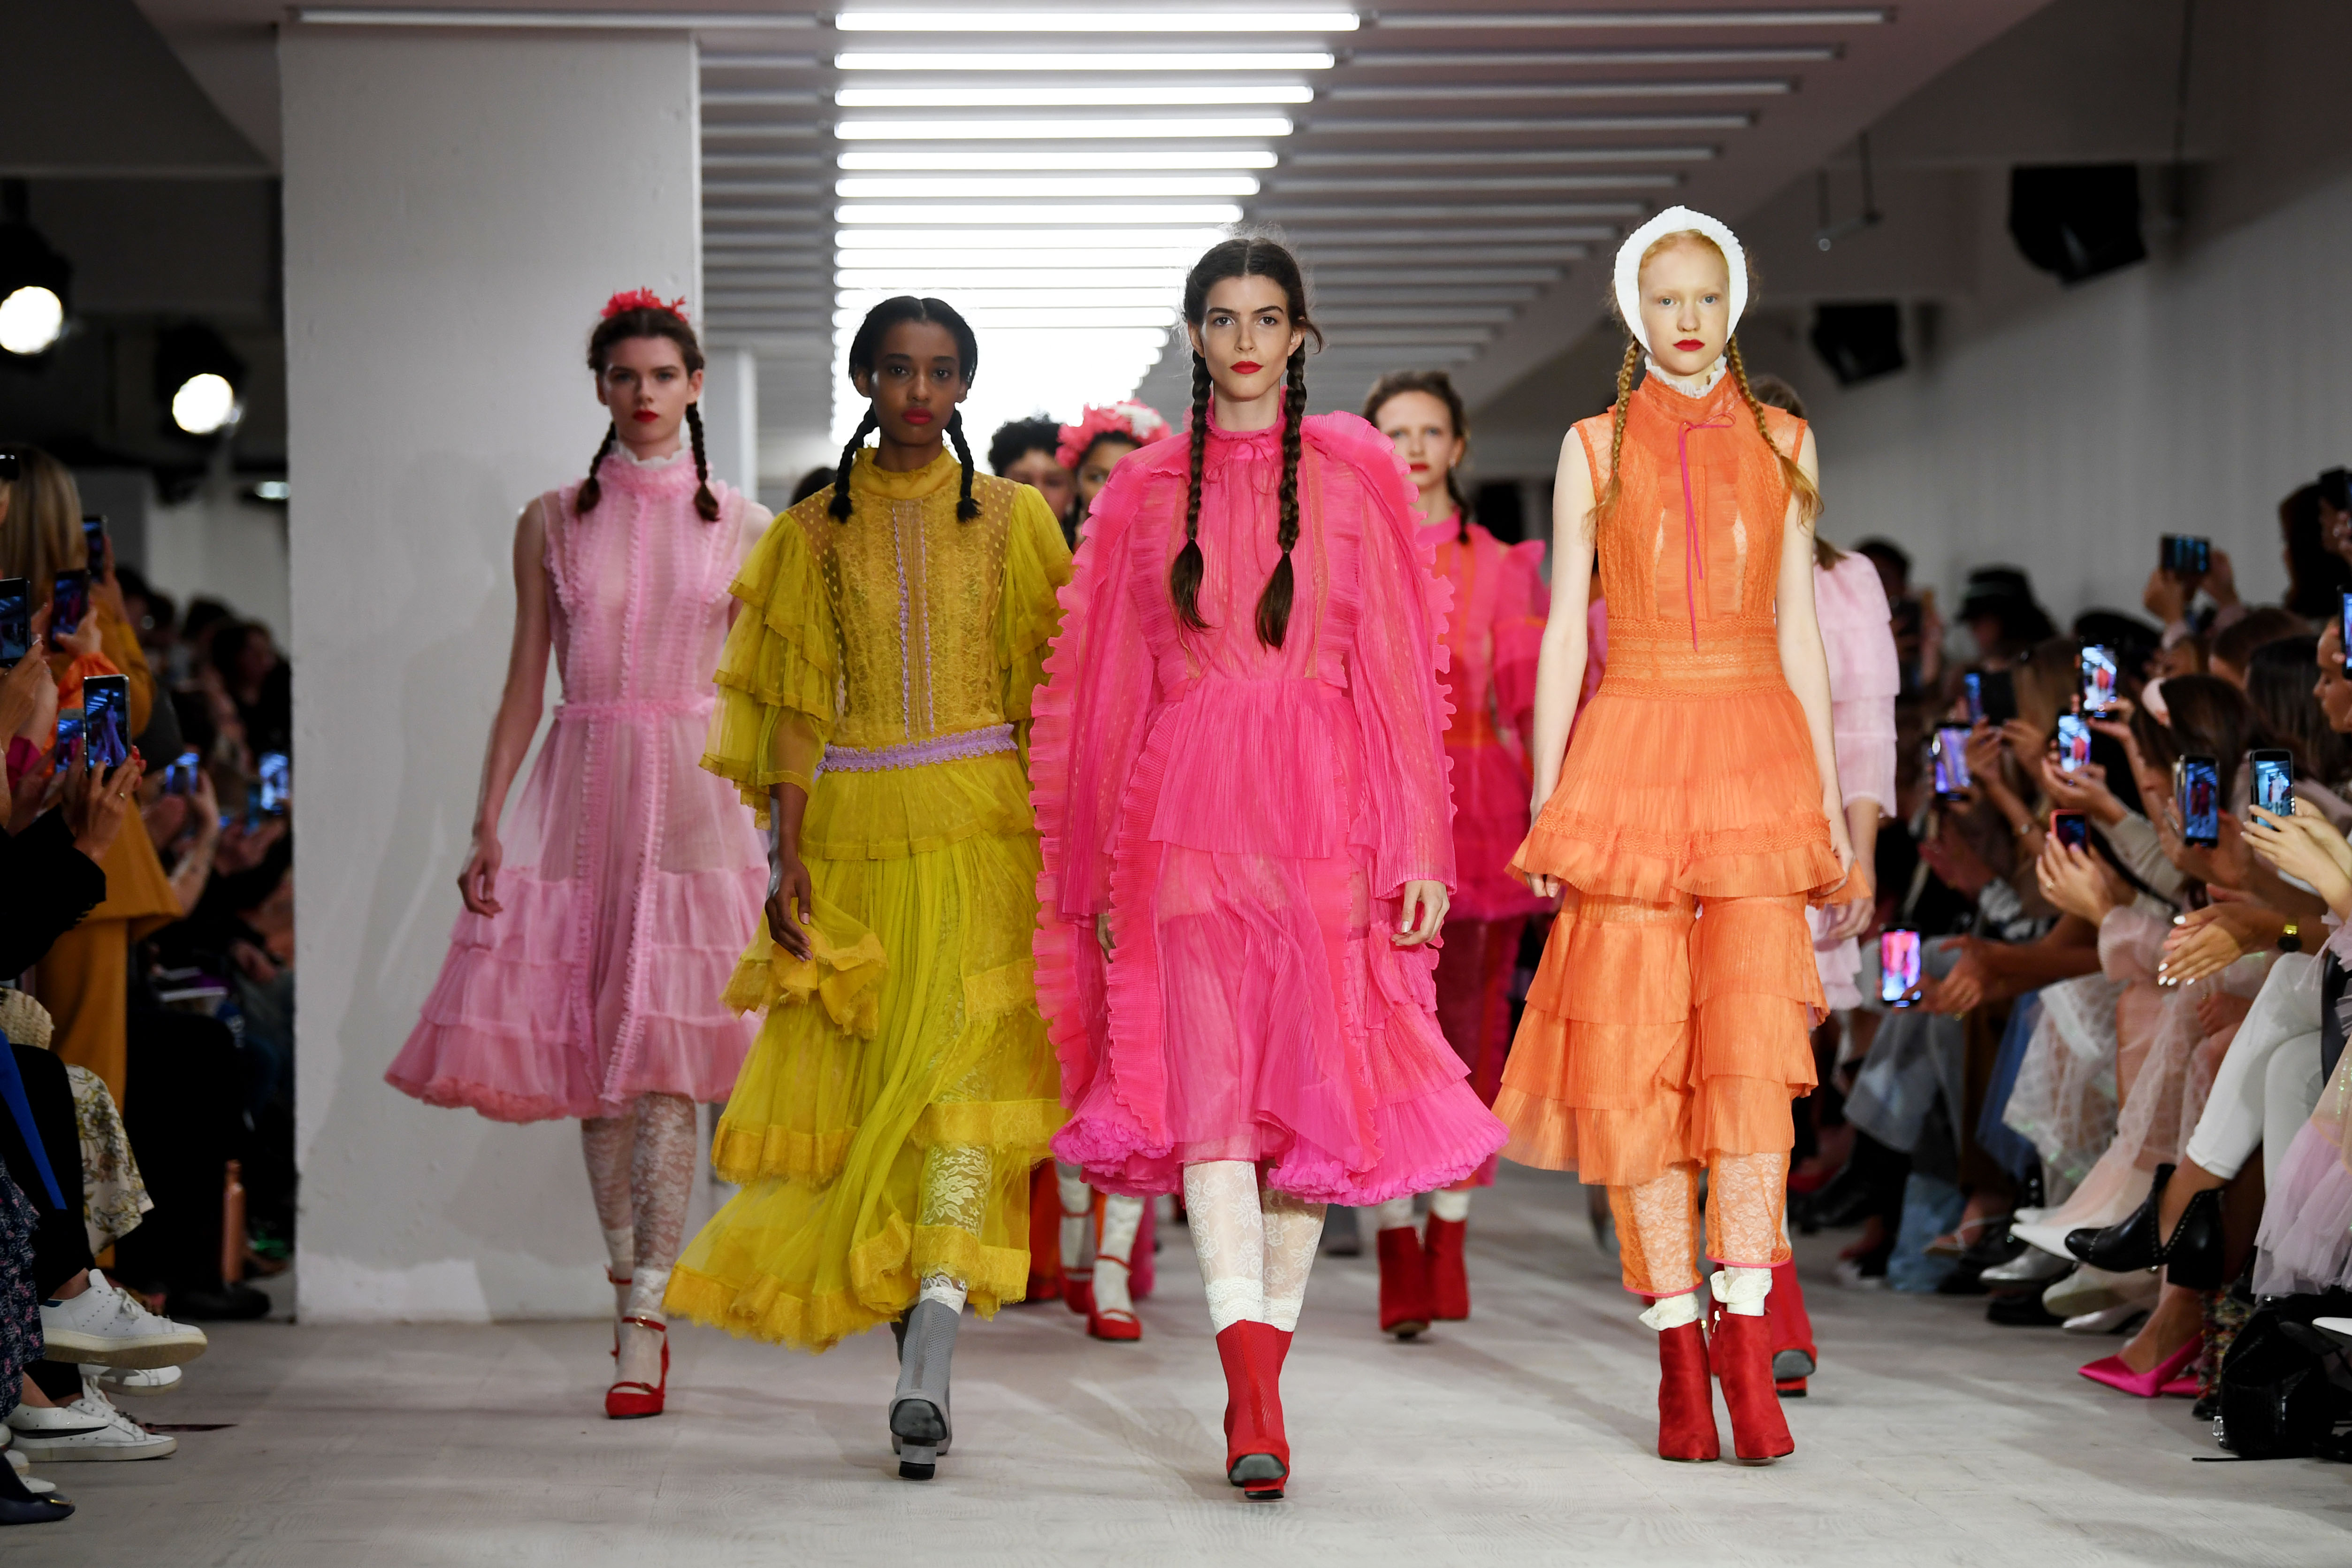 London Fashion Week Proves Its Worth - Our Fashion Trends